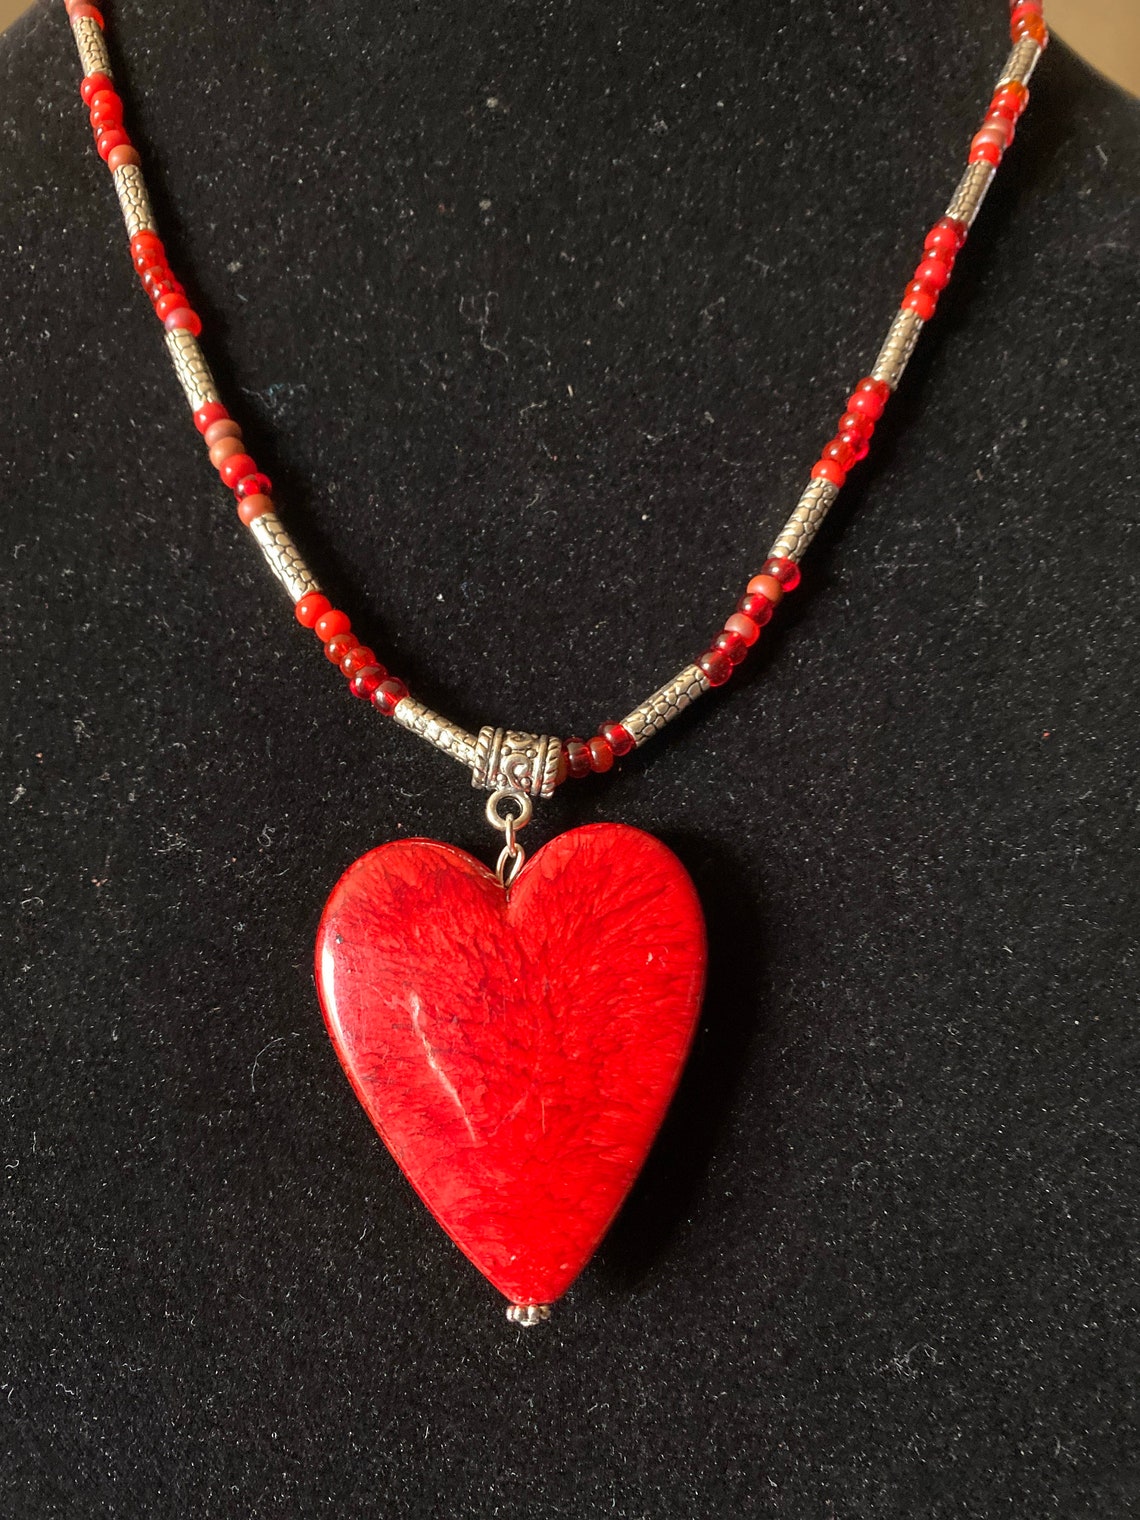 Heart Necklace Valentines Day Necklace Red Heart Necklace - Etsy